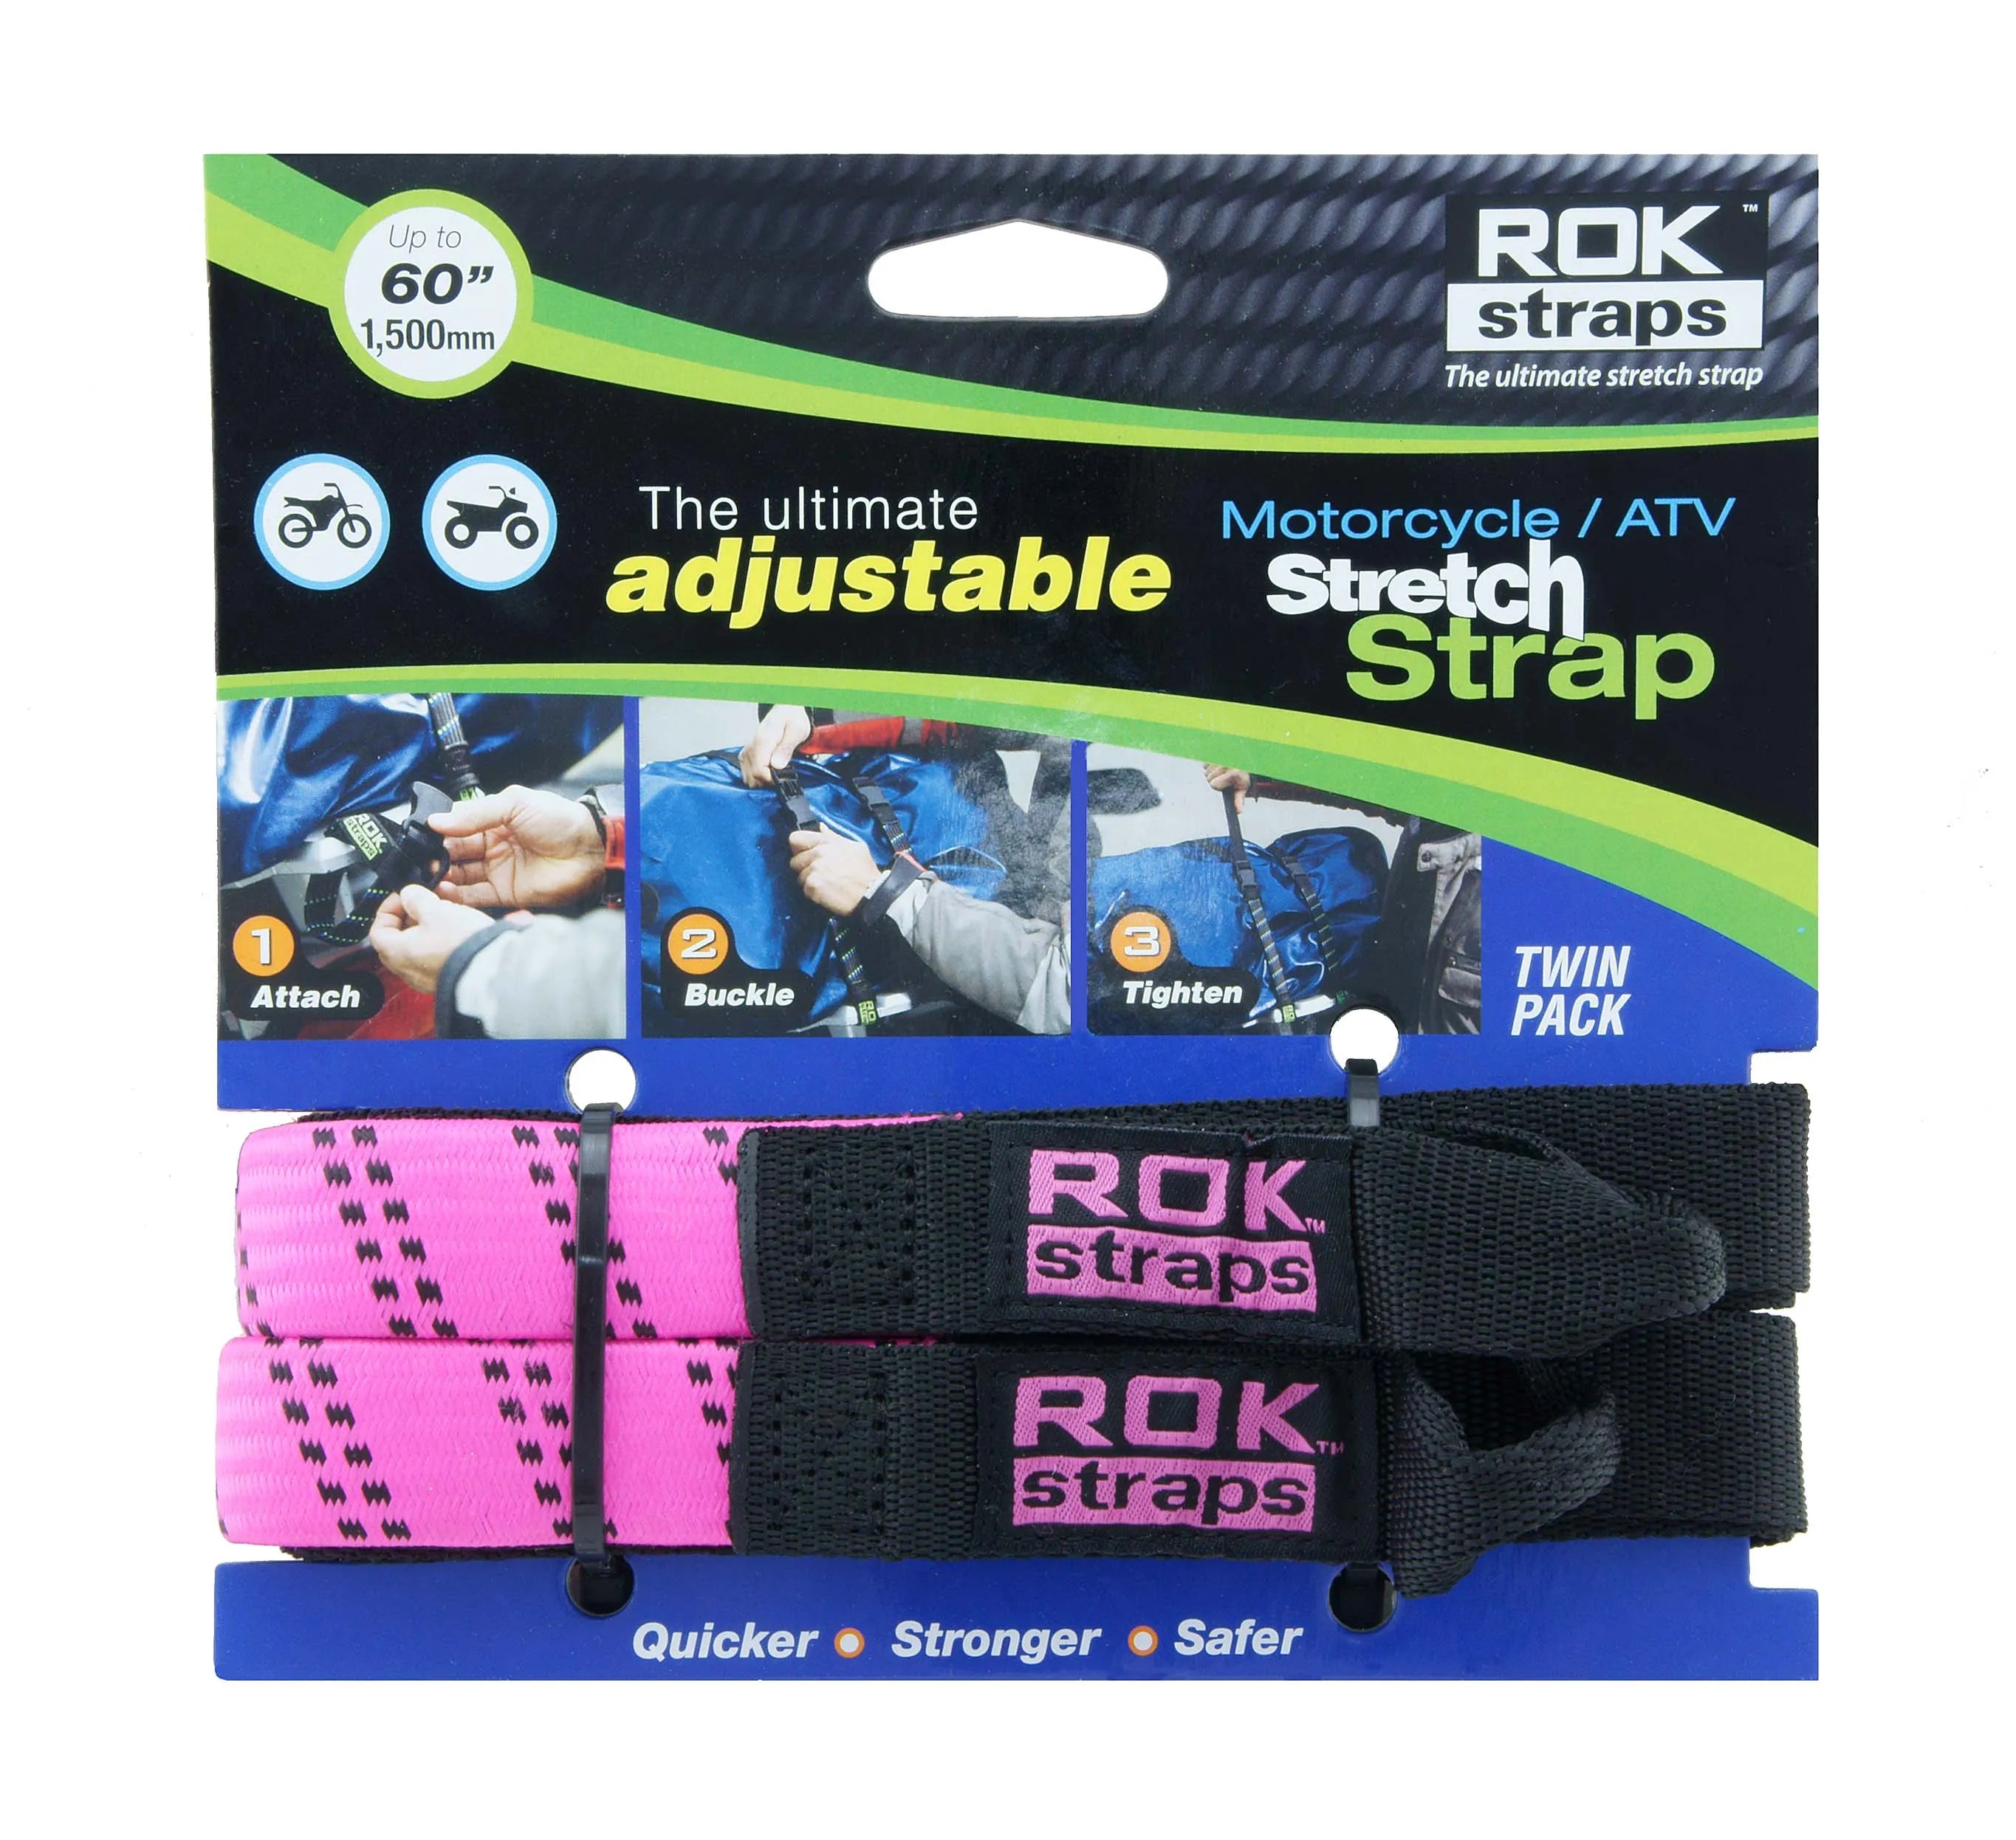 I Finally Upgraded To Rok Straps - Are They Really That Good? 